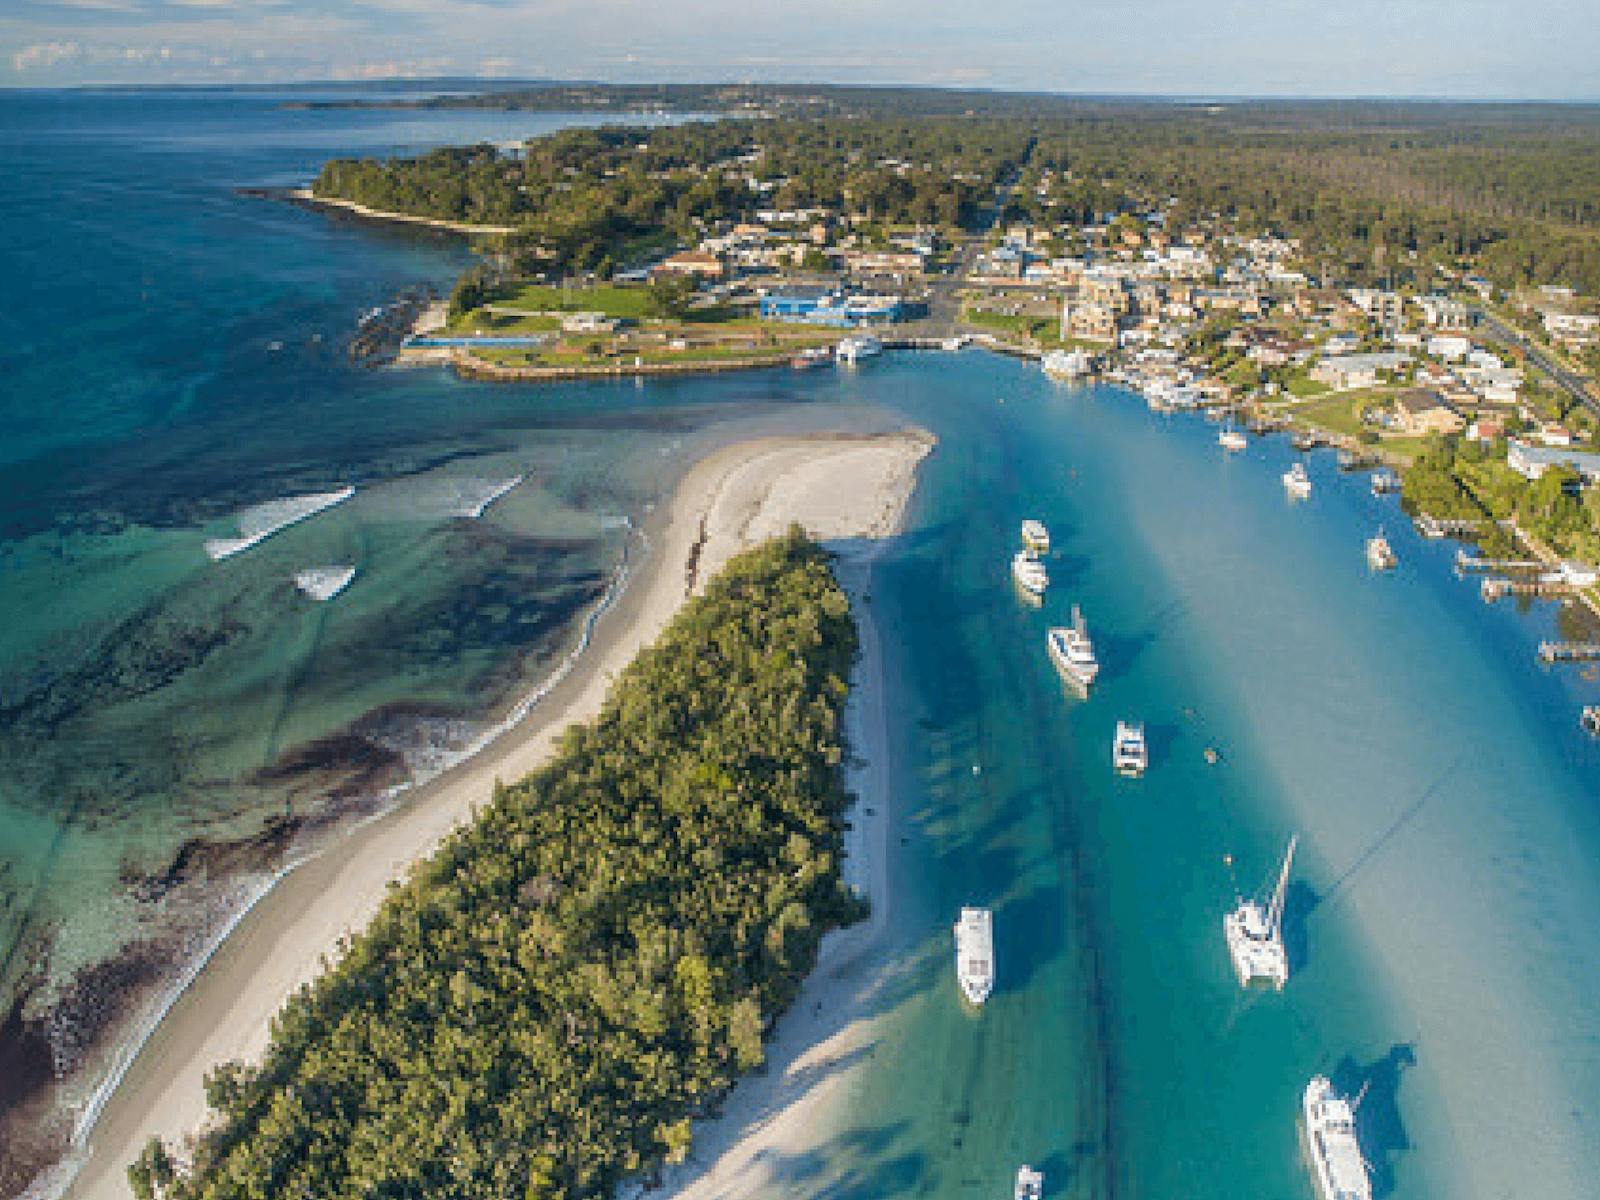 Huskisson's waterways and white sand beaches, boutiques and eateries make it a popular hub of Jervis